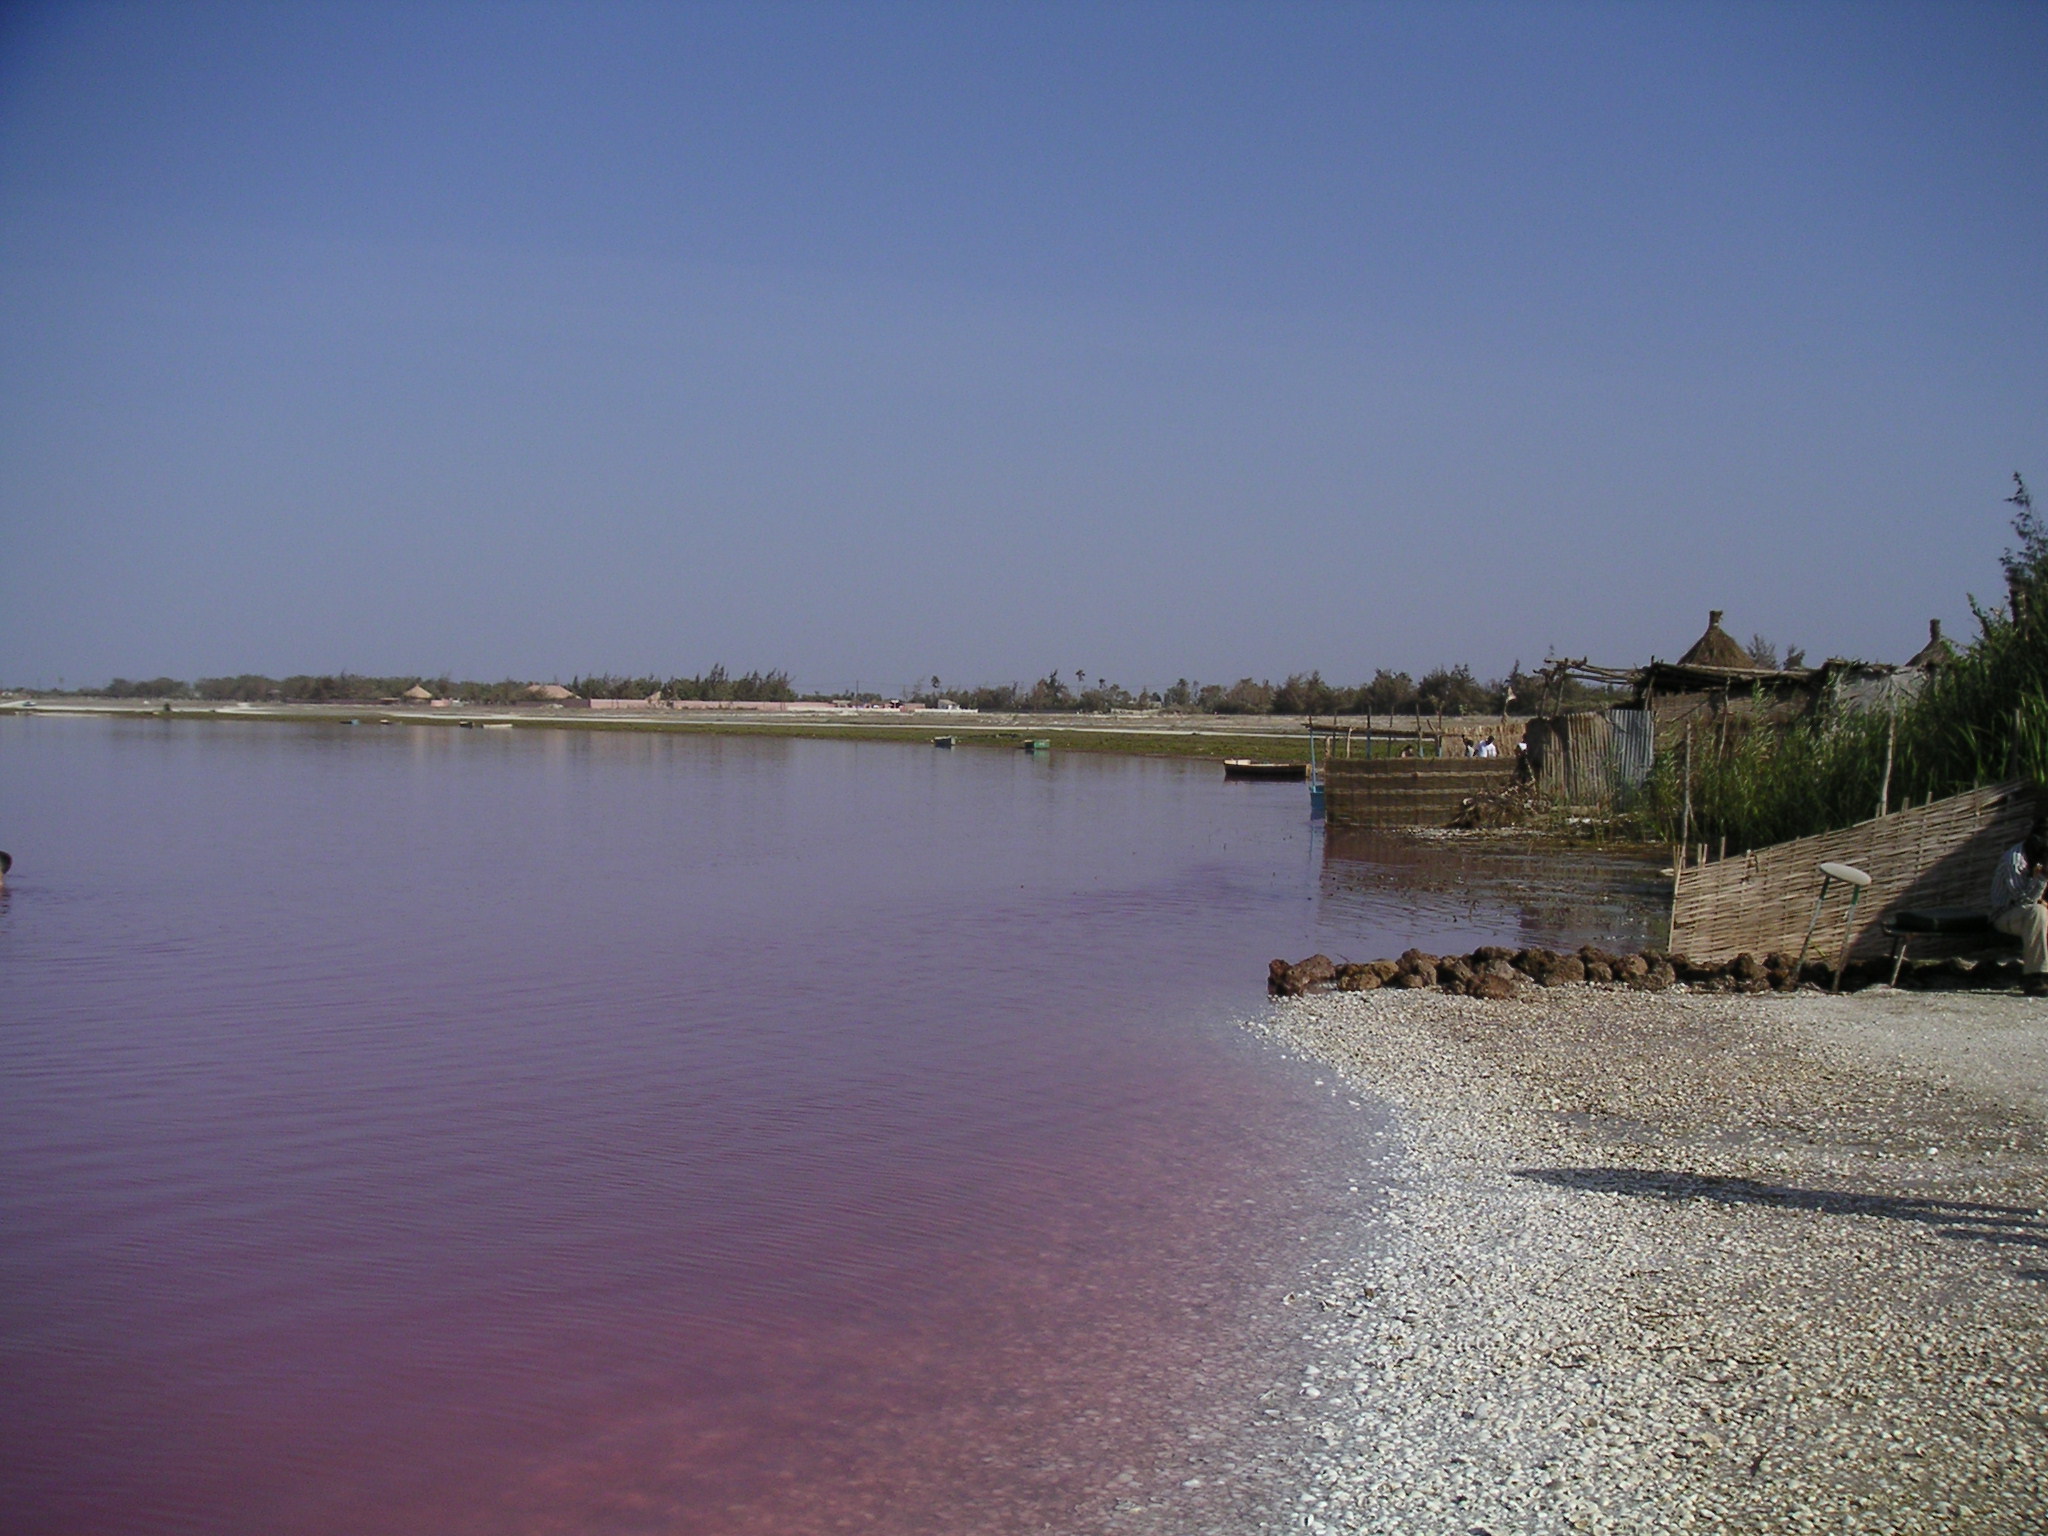 Lac Rose …By Any Other Name Would Look Just As Blue